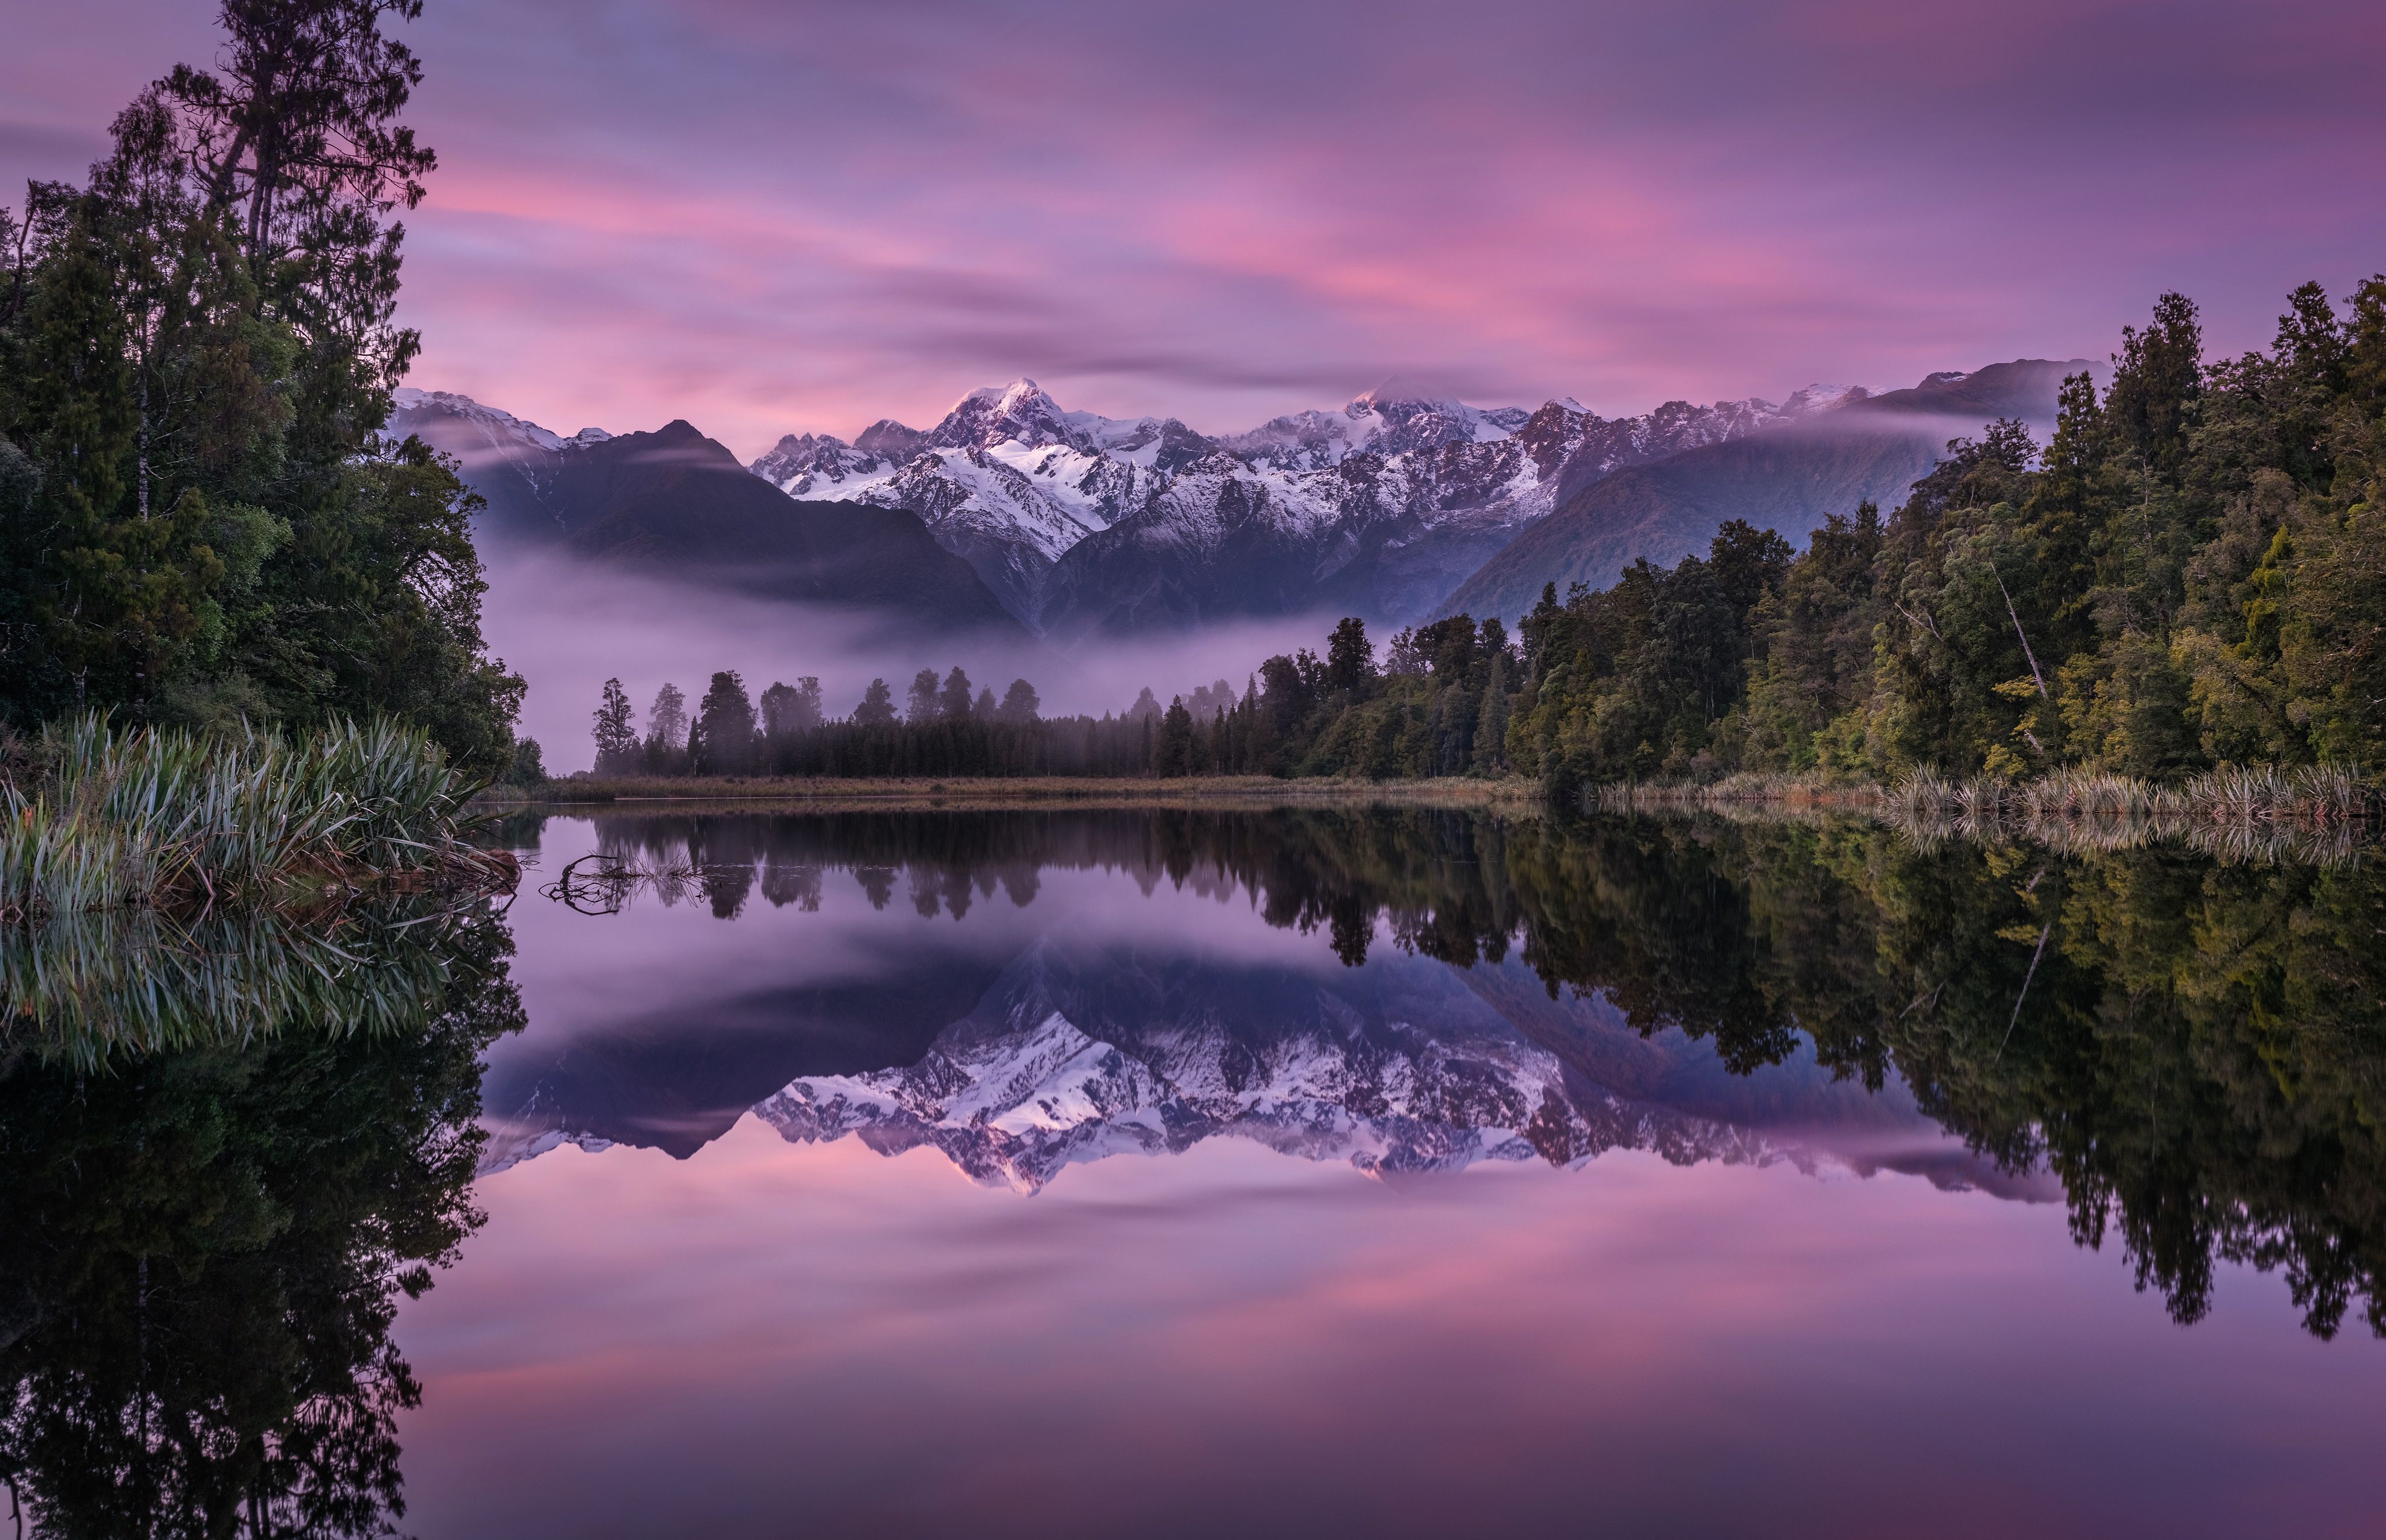 A stunning view of a mountain range and forest reflected in a lake at sunset. - Lake